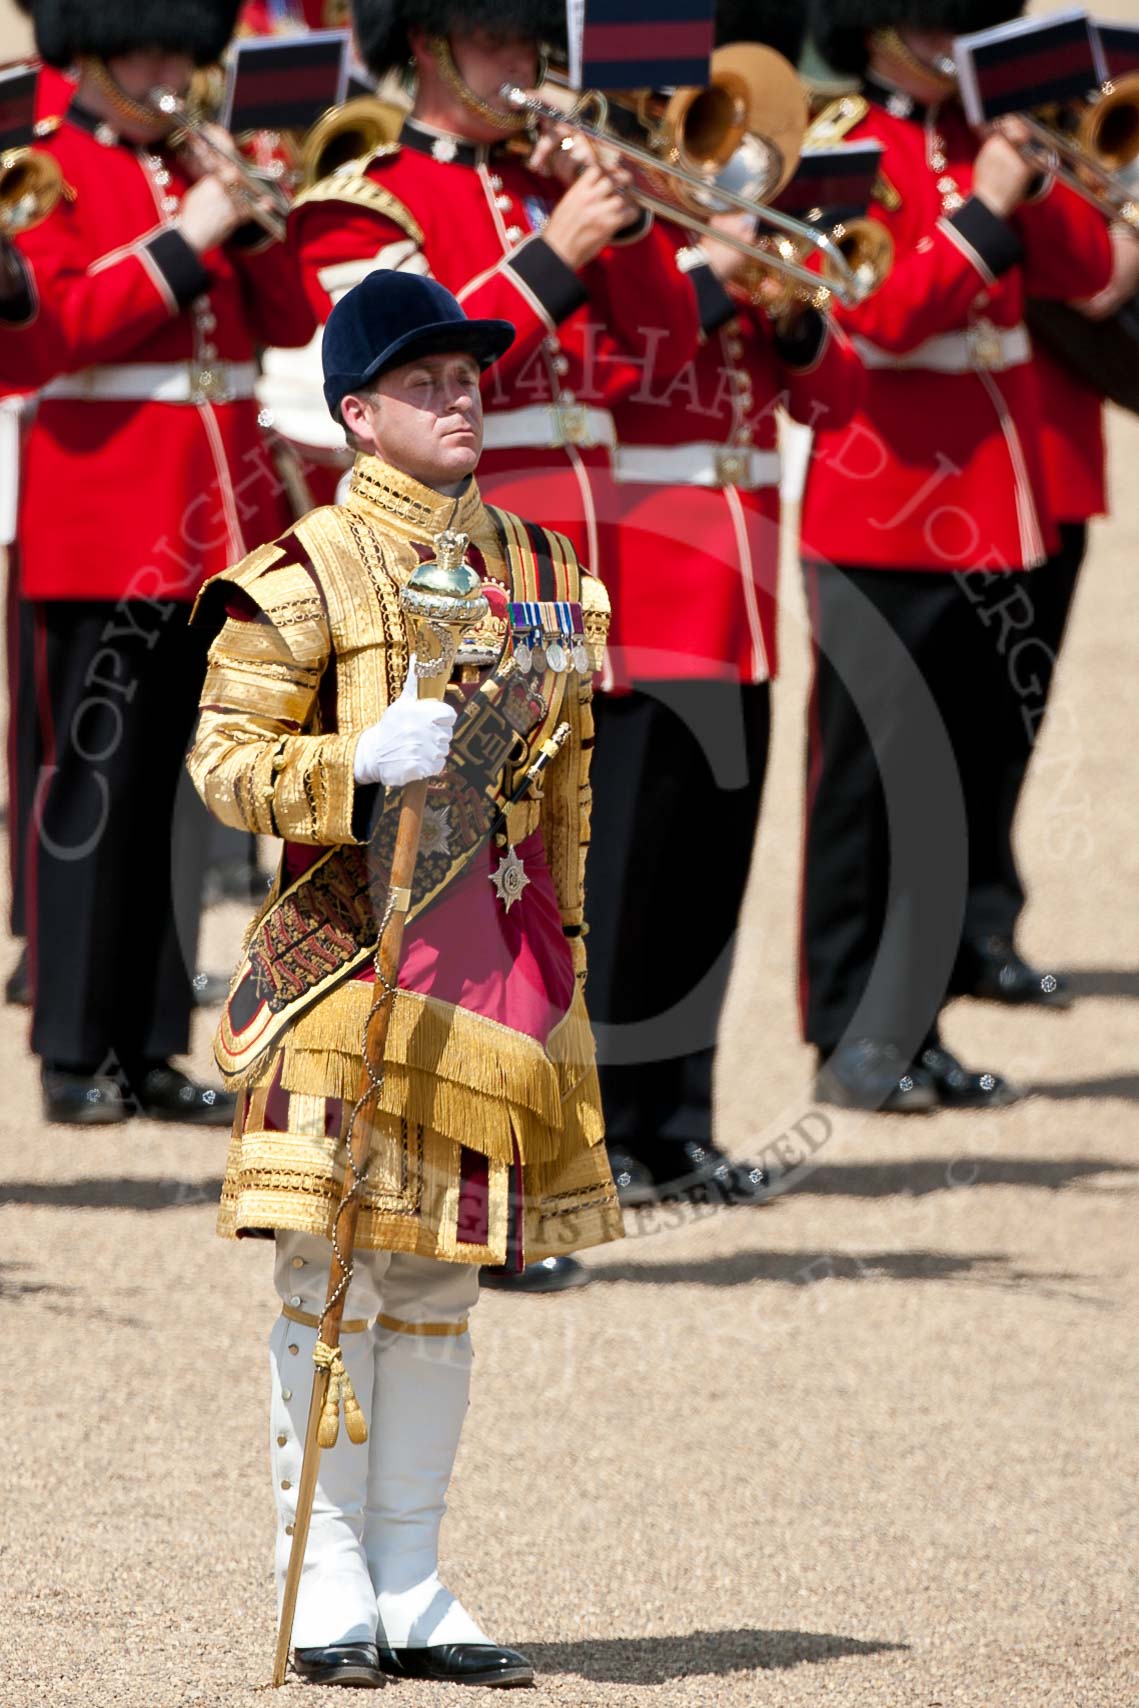 Trooping the Colour 2009: Drum Major C Patterson, Irish Guards..
Horse Guards Parade, Westminster,
London SW1,

United Kingdom,
on 13 June 2009 at 11:42, image #215